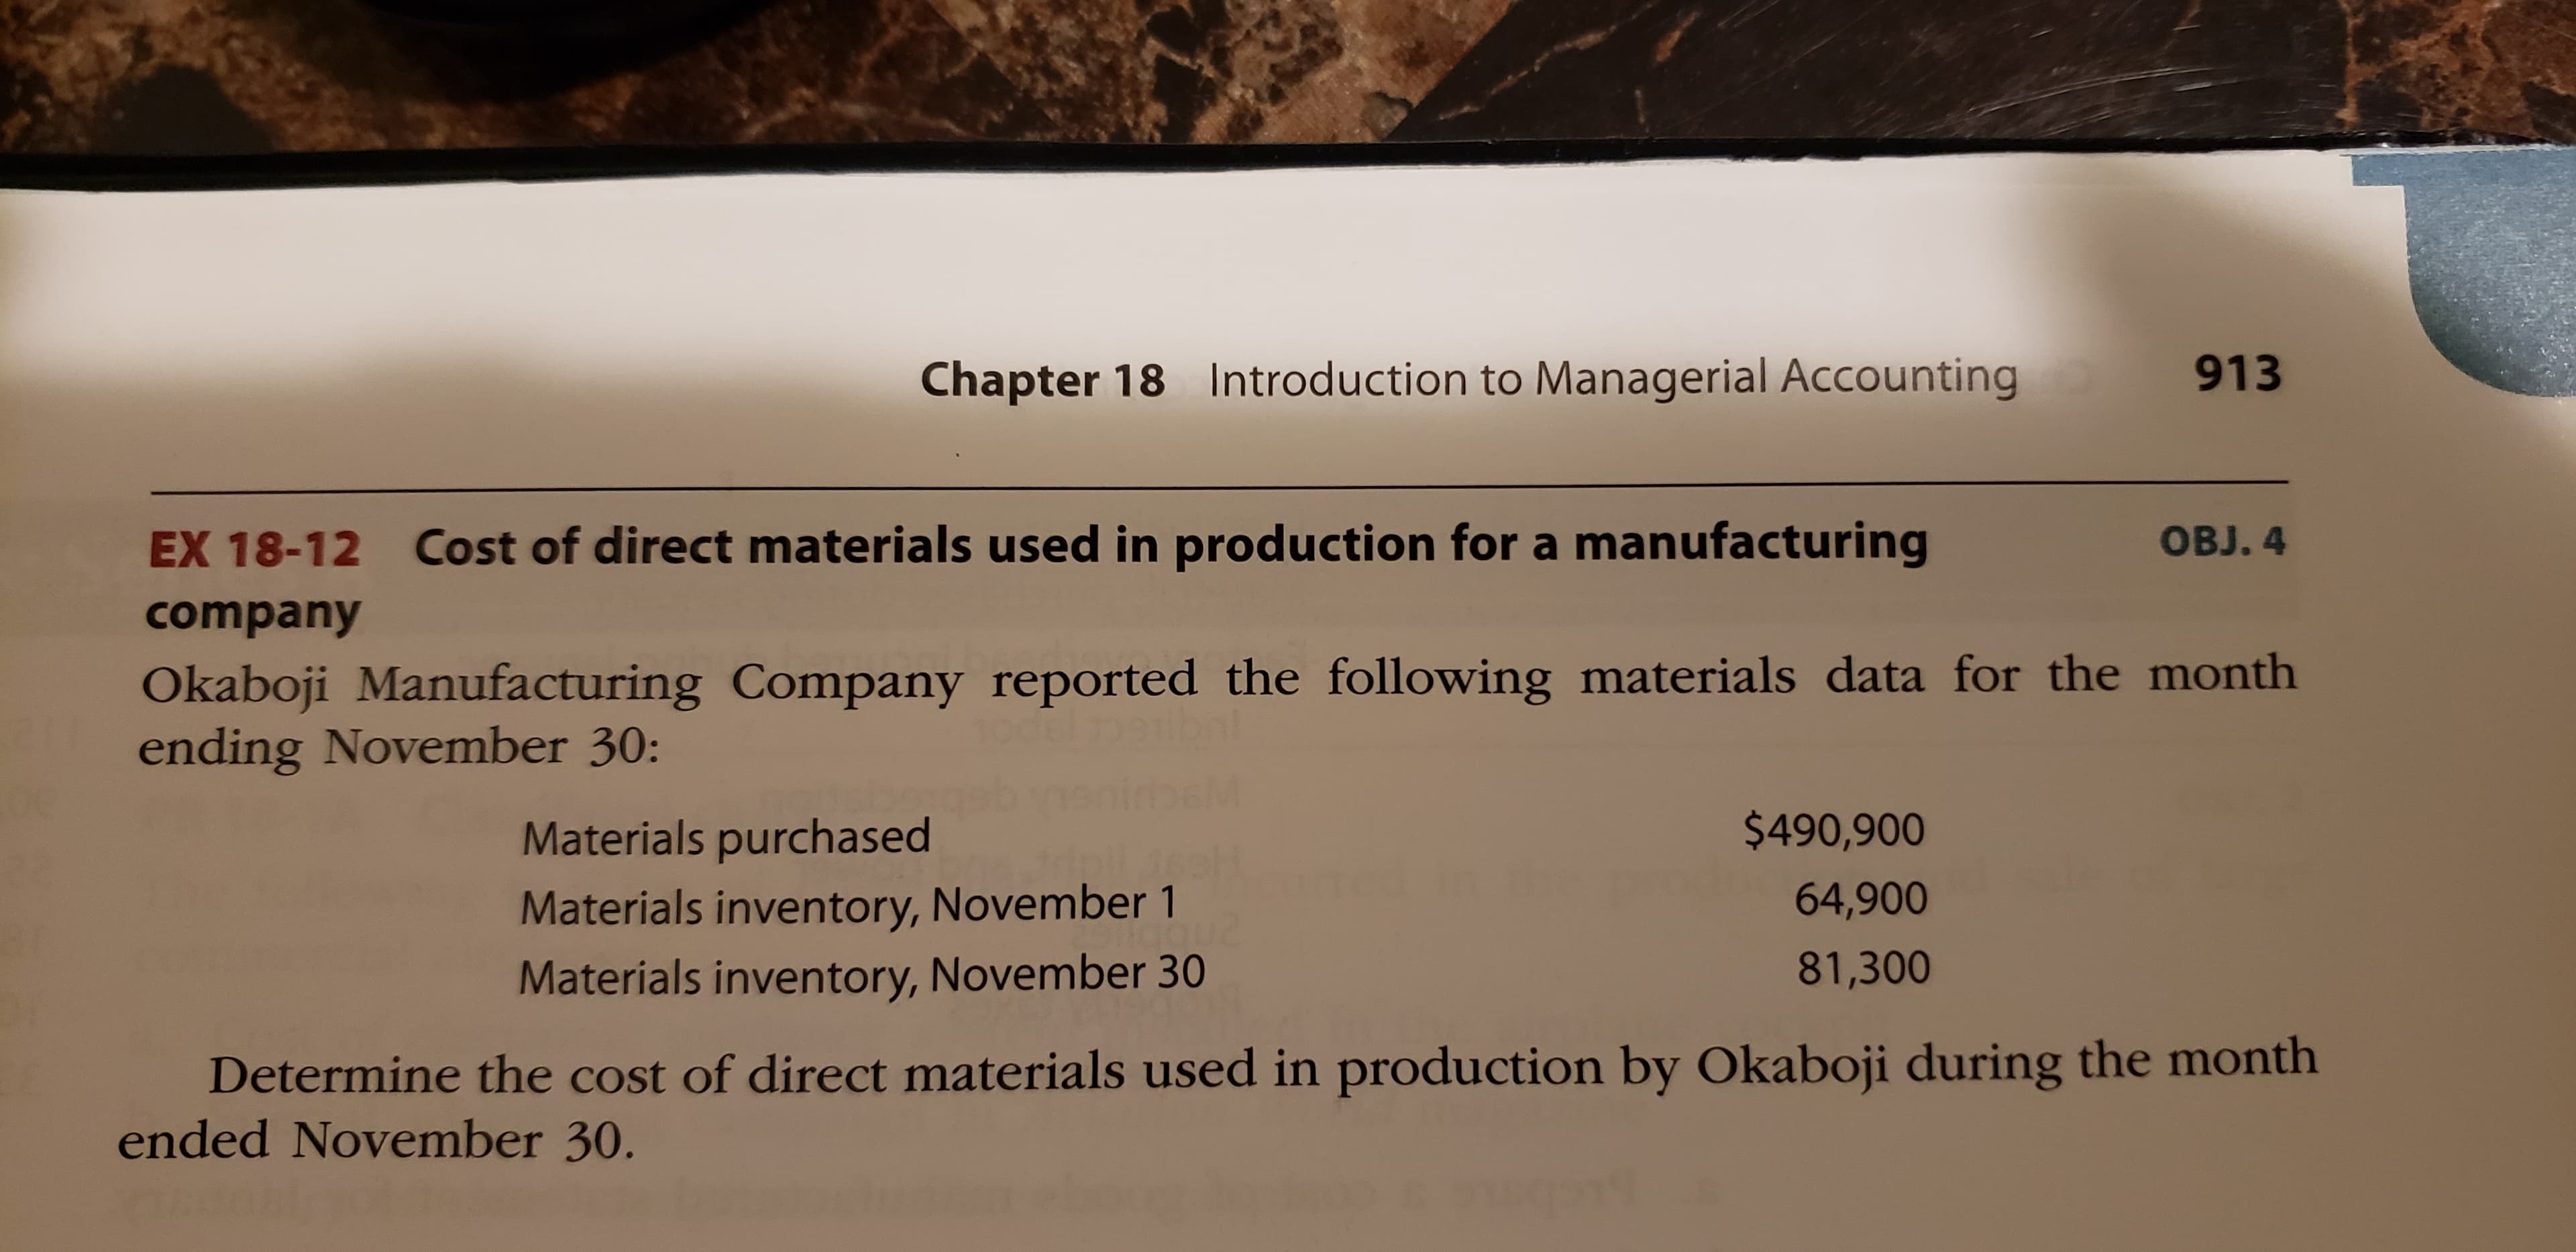 Chapter 18 Introduction to Managerial Accounting
913
EX 18-12 Cost of direct materials used in production for a manufacturing
OBJ. 4
company
Okaboji Manufacturing Company reported the following materials data for the month
ending November 30:
Materials purchased
$490,900
Materials inventory, November 1
64,900
Materials inventory, November 30
81,300
Determine the cost of direct materials used in production by Okaboji during the month
ended November 30.
